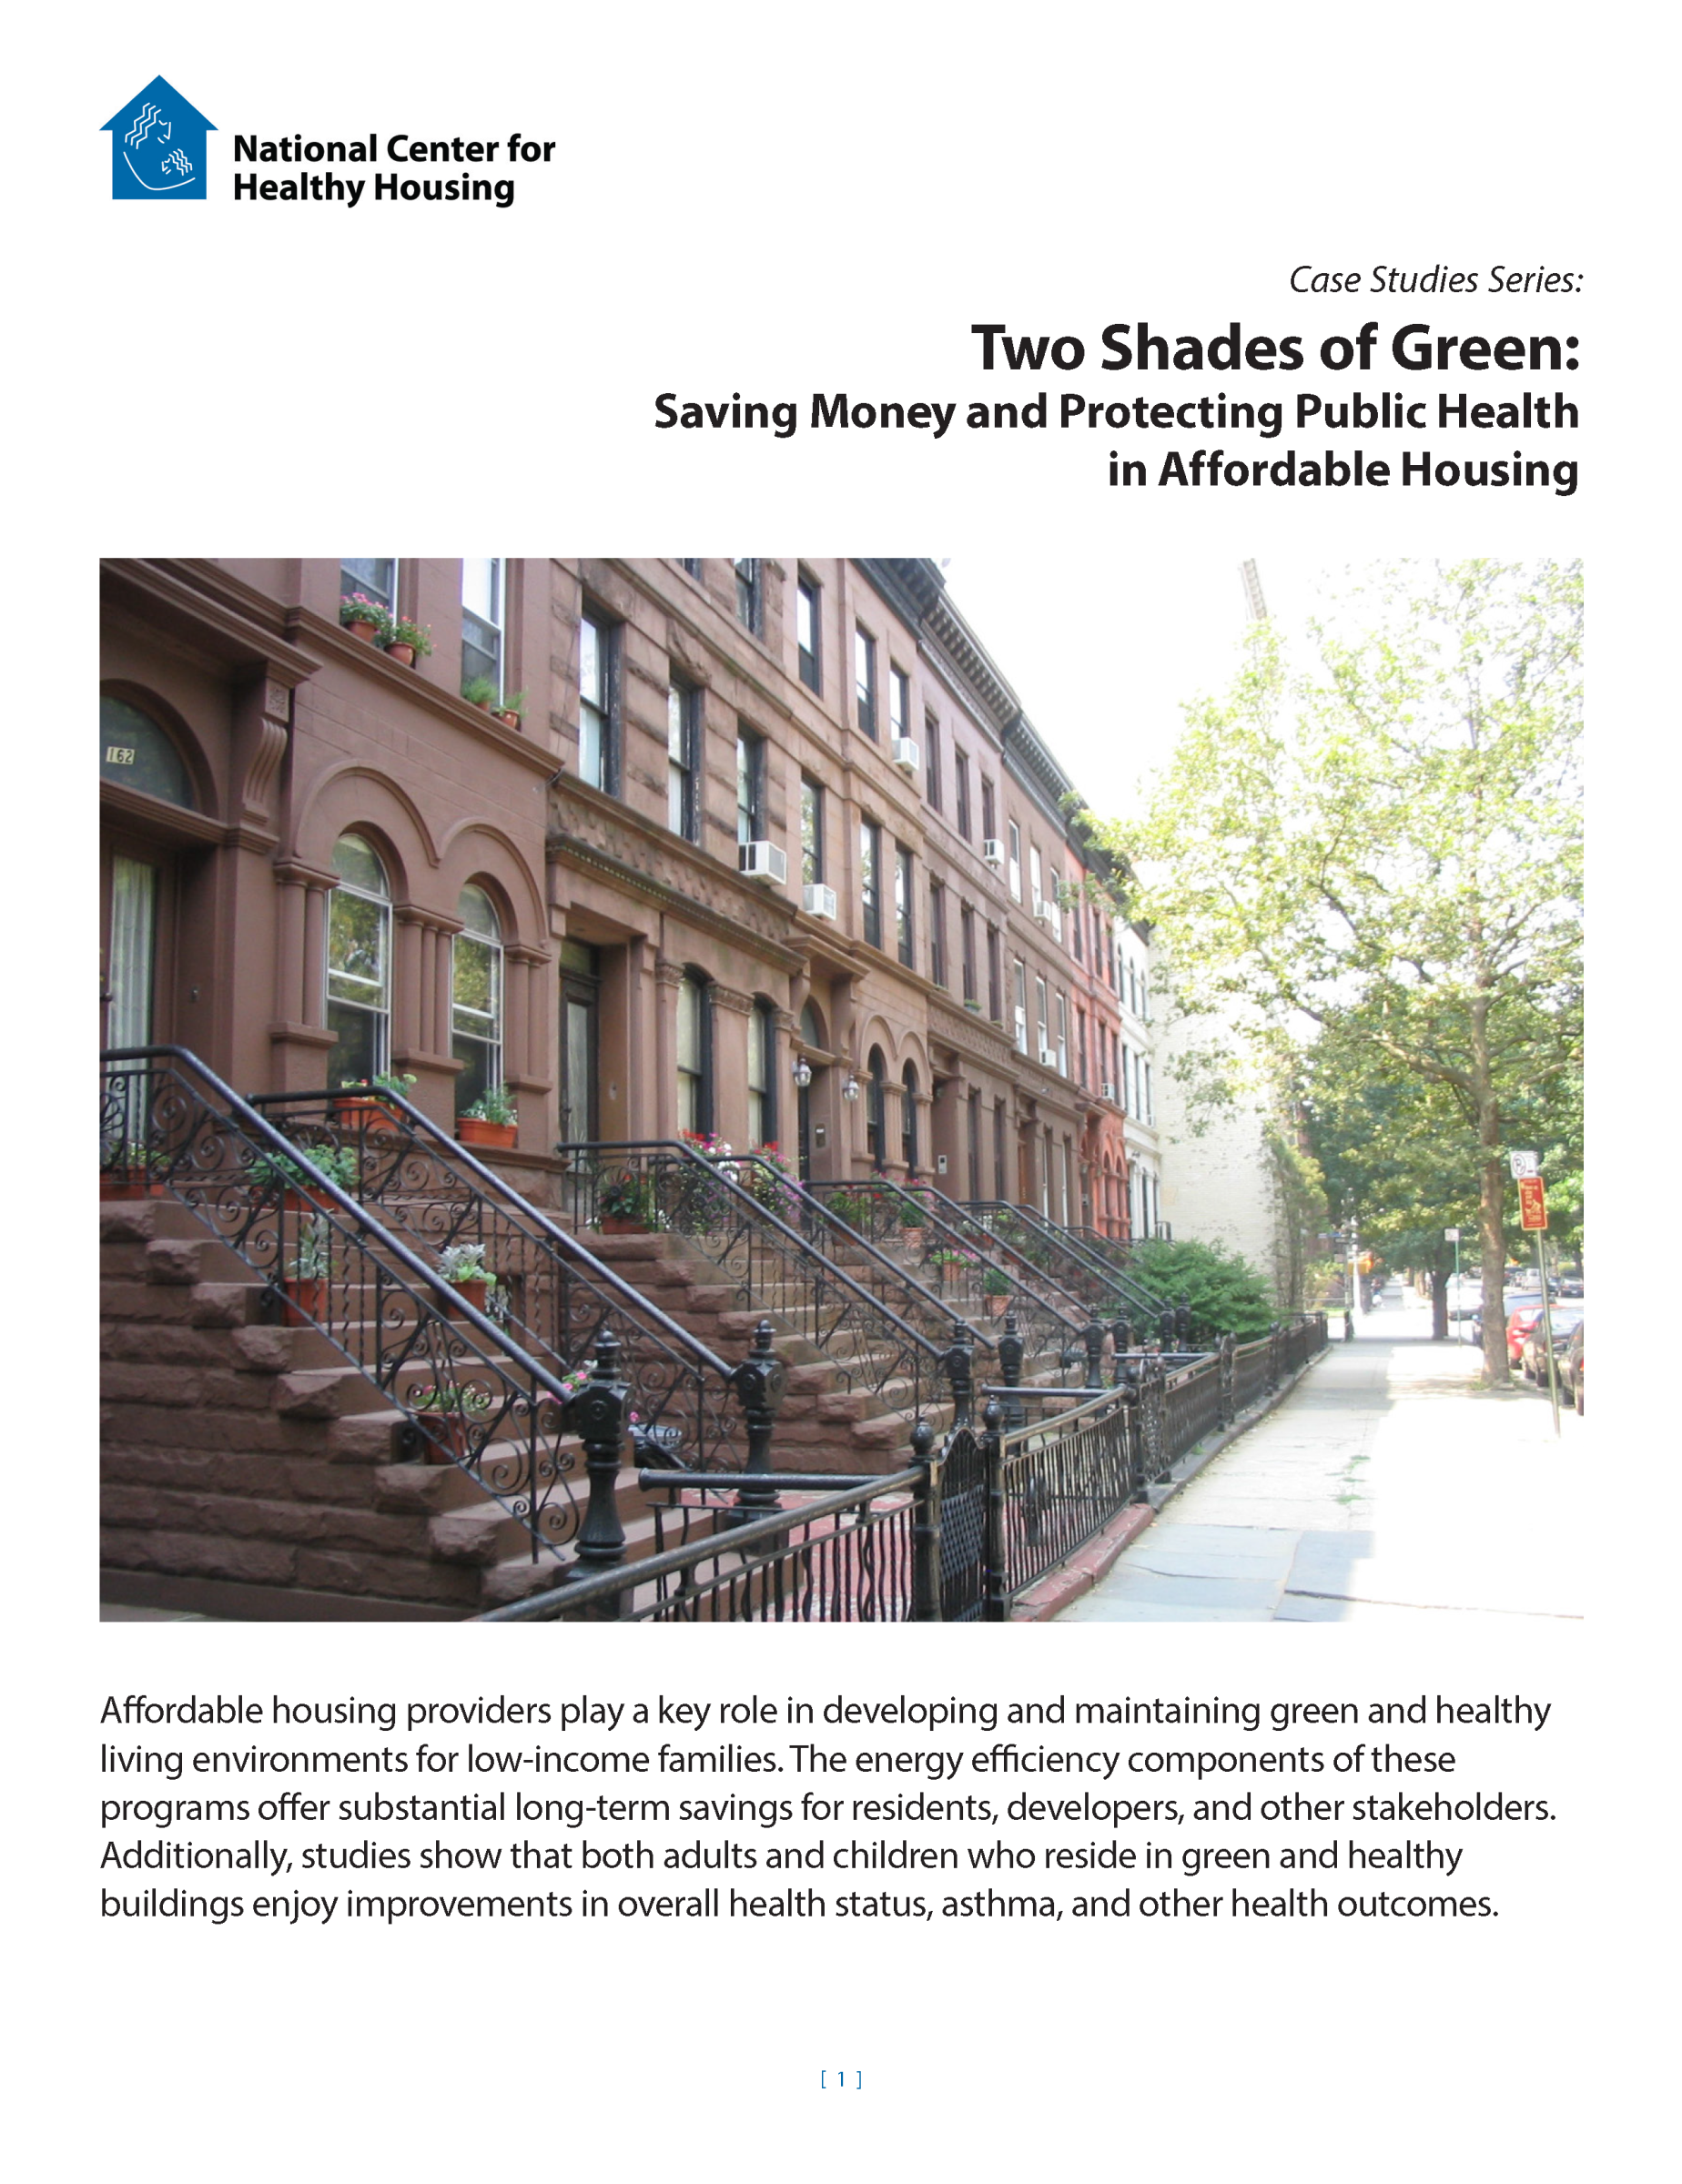 Case Study - Two Shades of Green